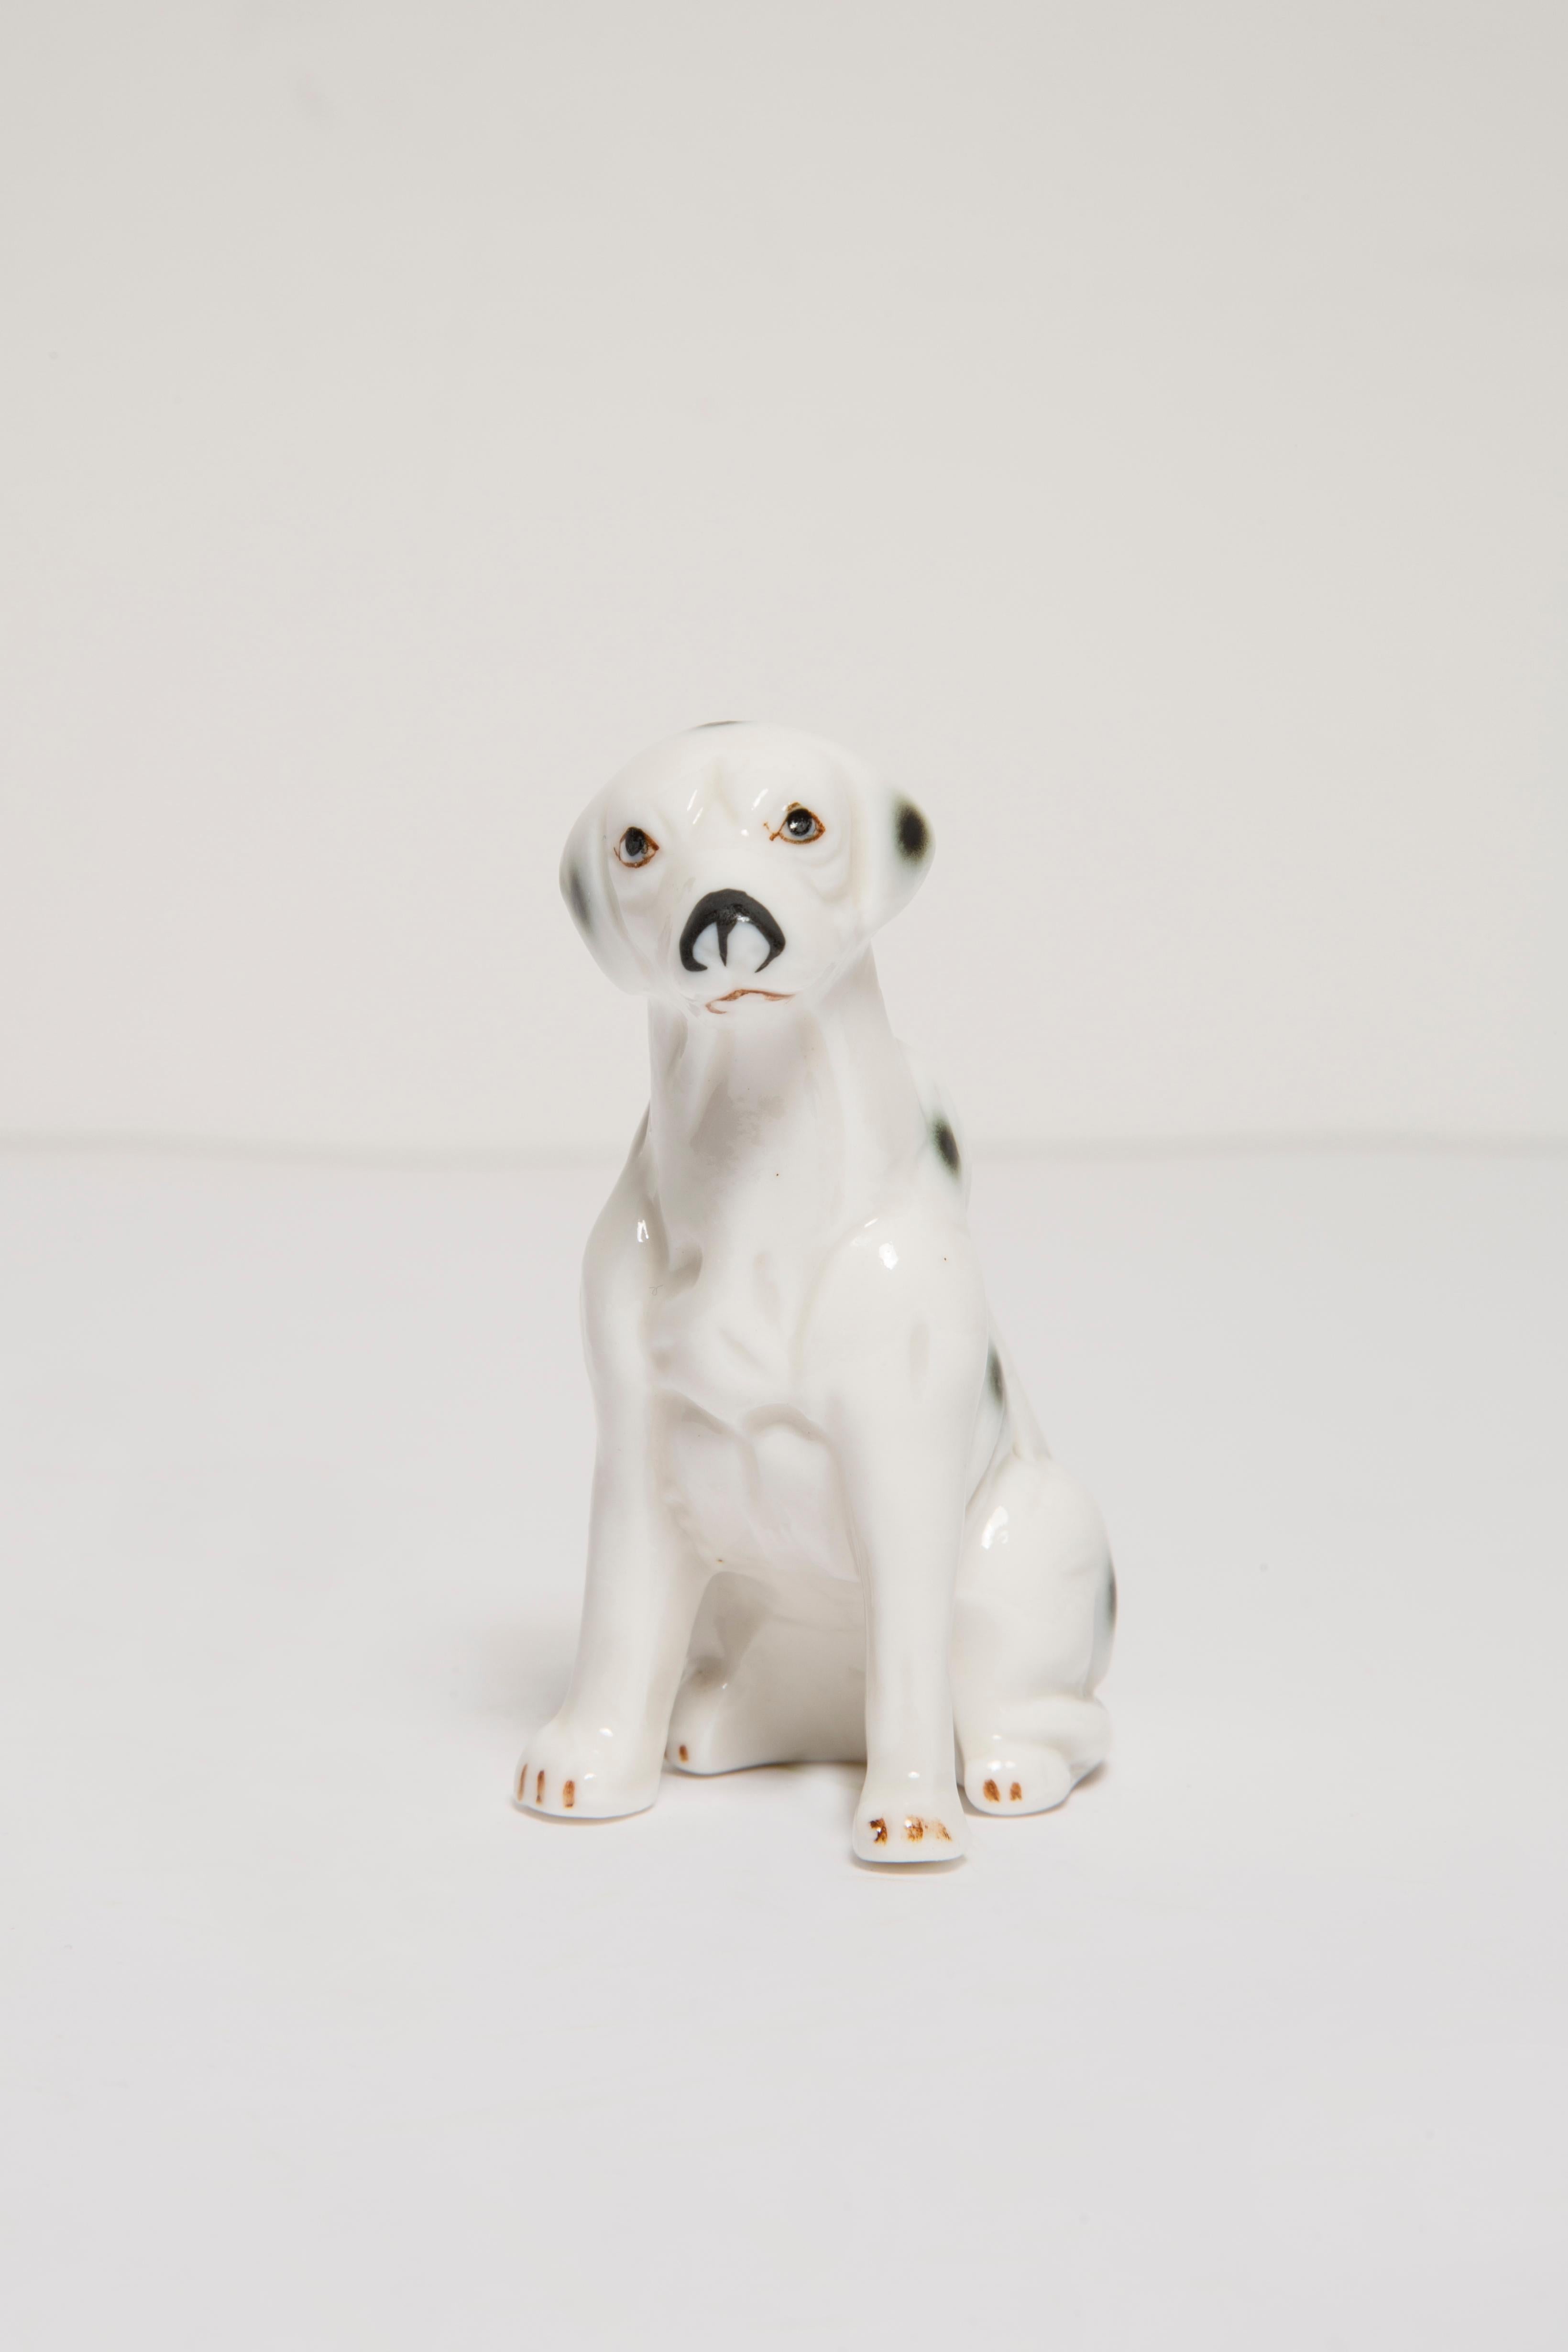 Painted ceramic, very good original vintage condition. No damages or cracks. Beautiful and unique decorative sculpture. Mini White Poodle Dog Sculpture was produced in Italy. Only one dog available.